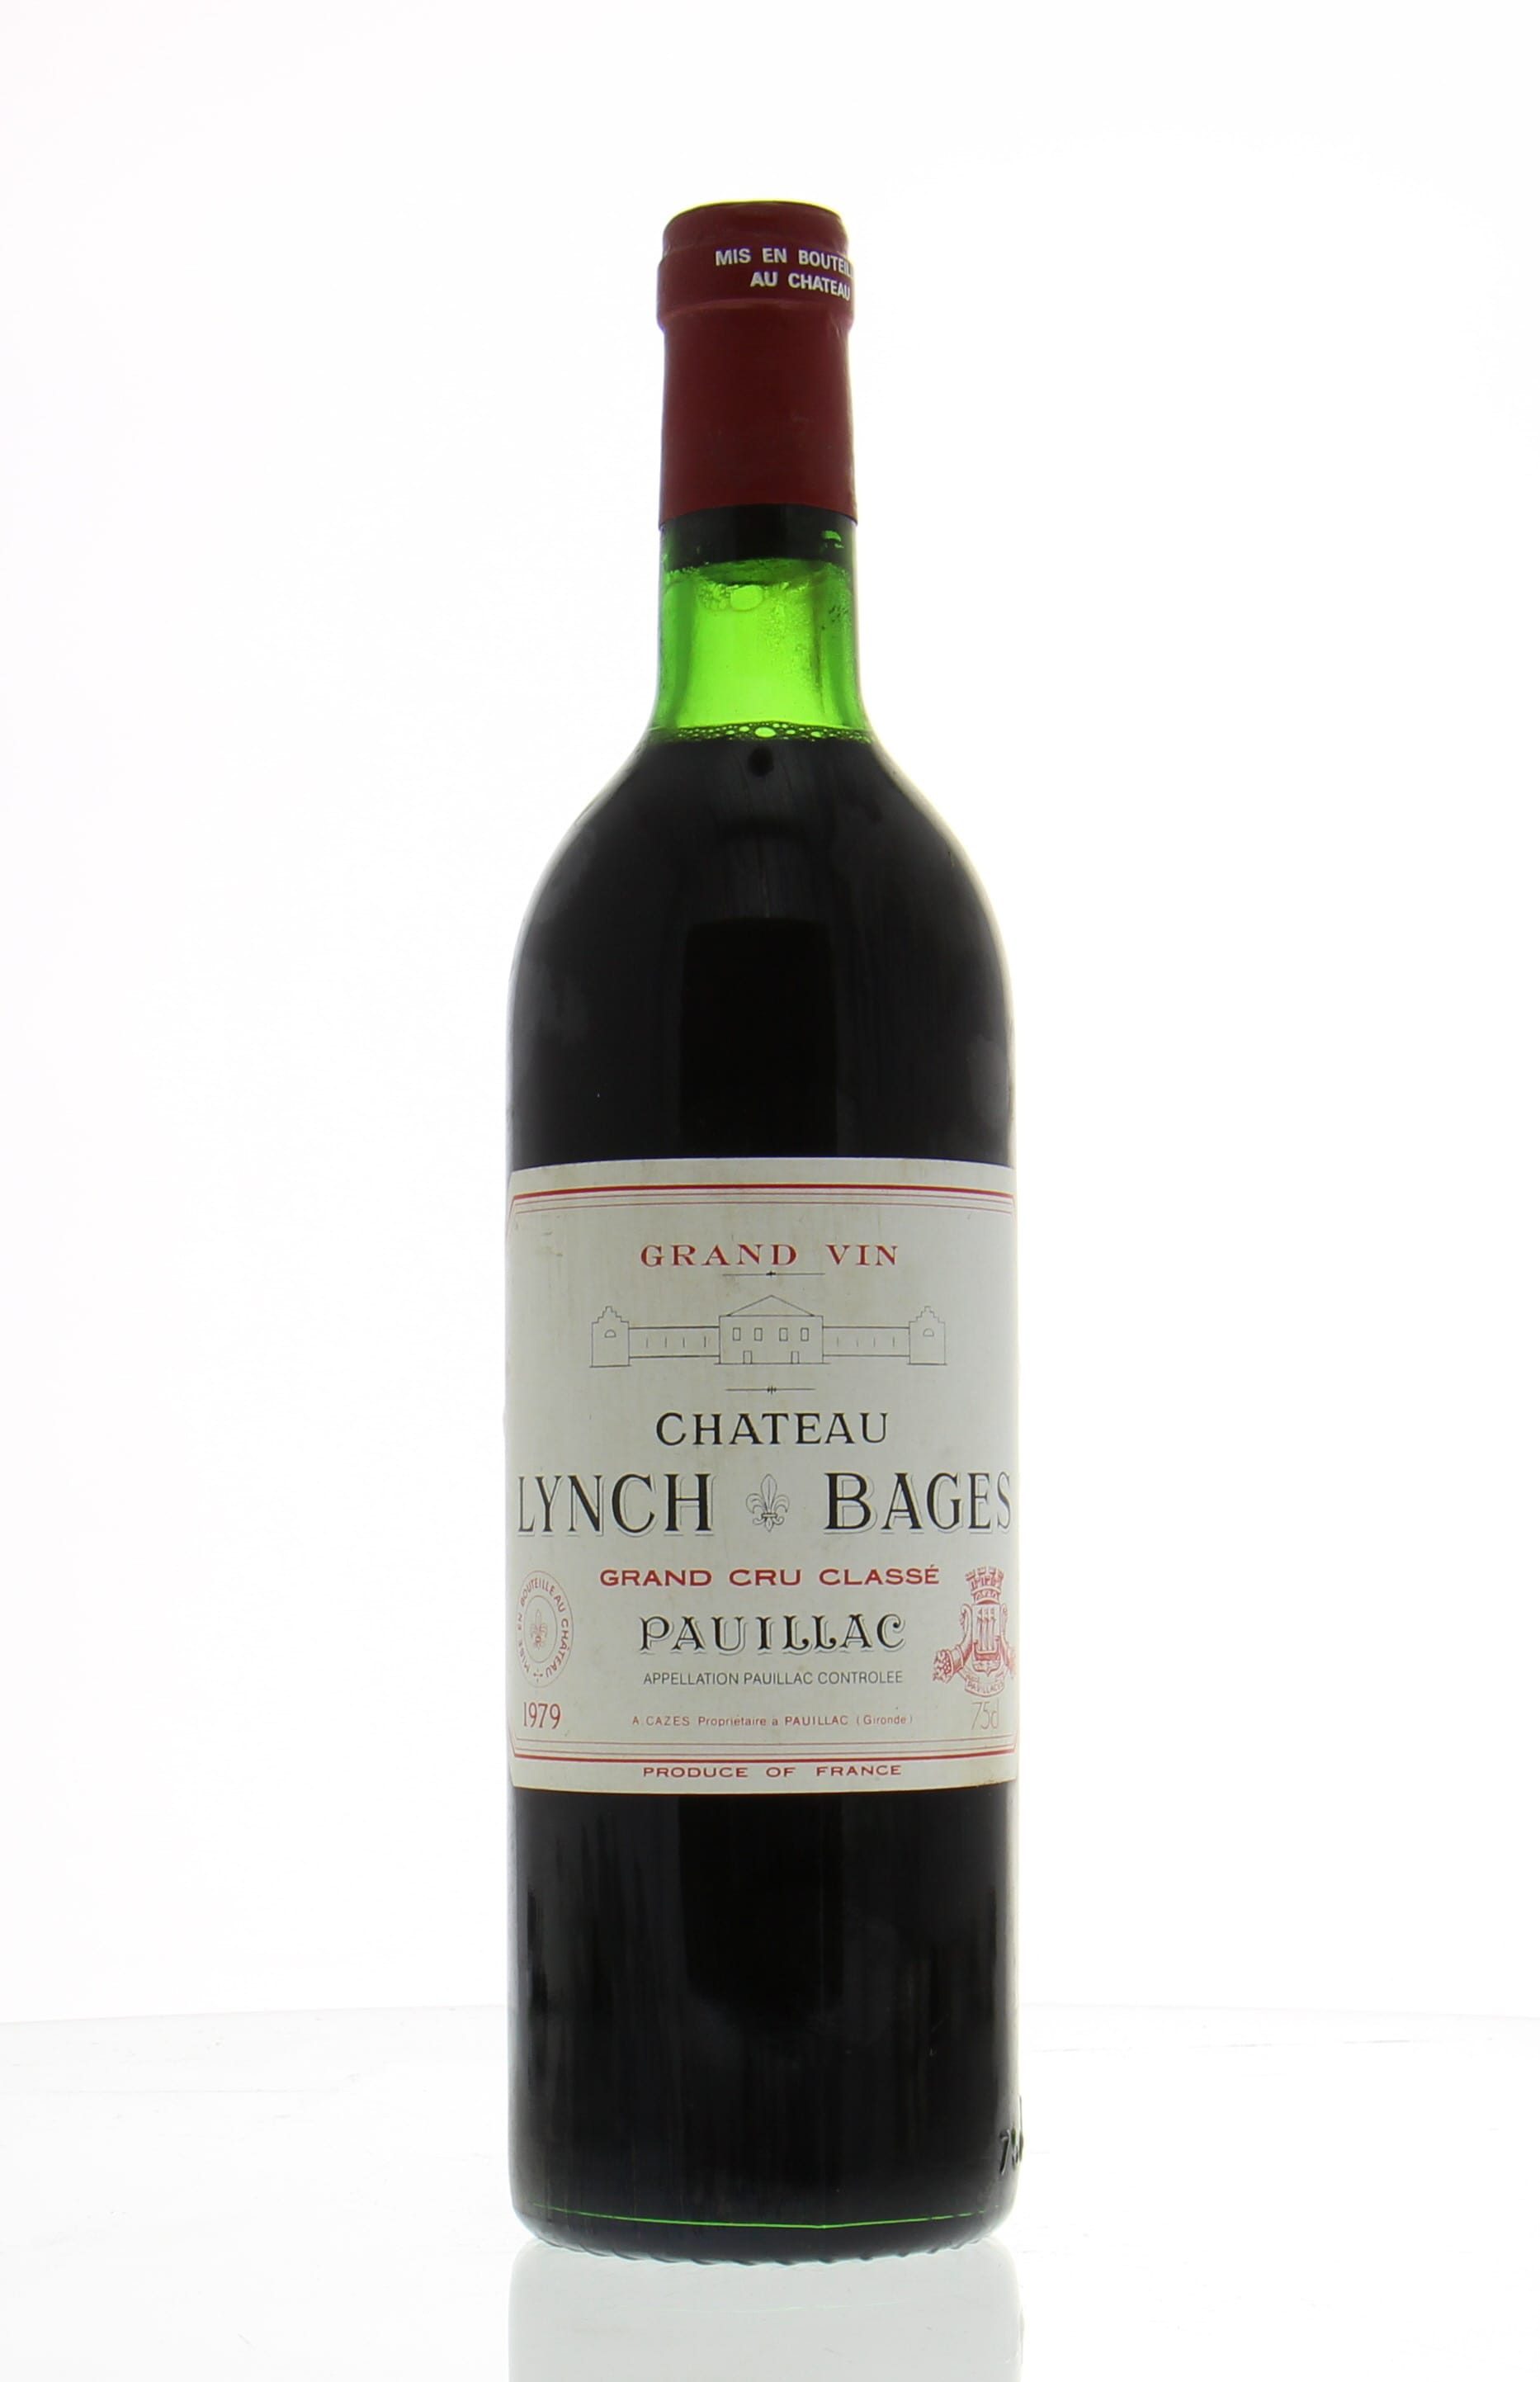 Chateau Lynch Bages - Chateau Lynch Bages 1979